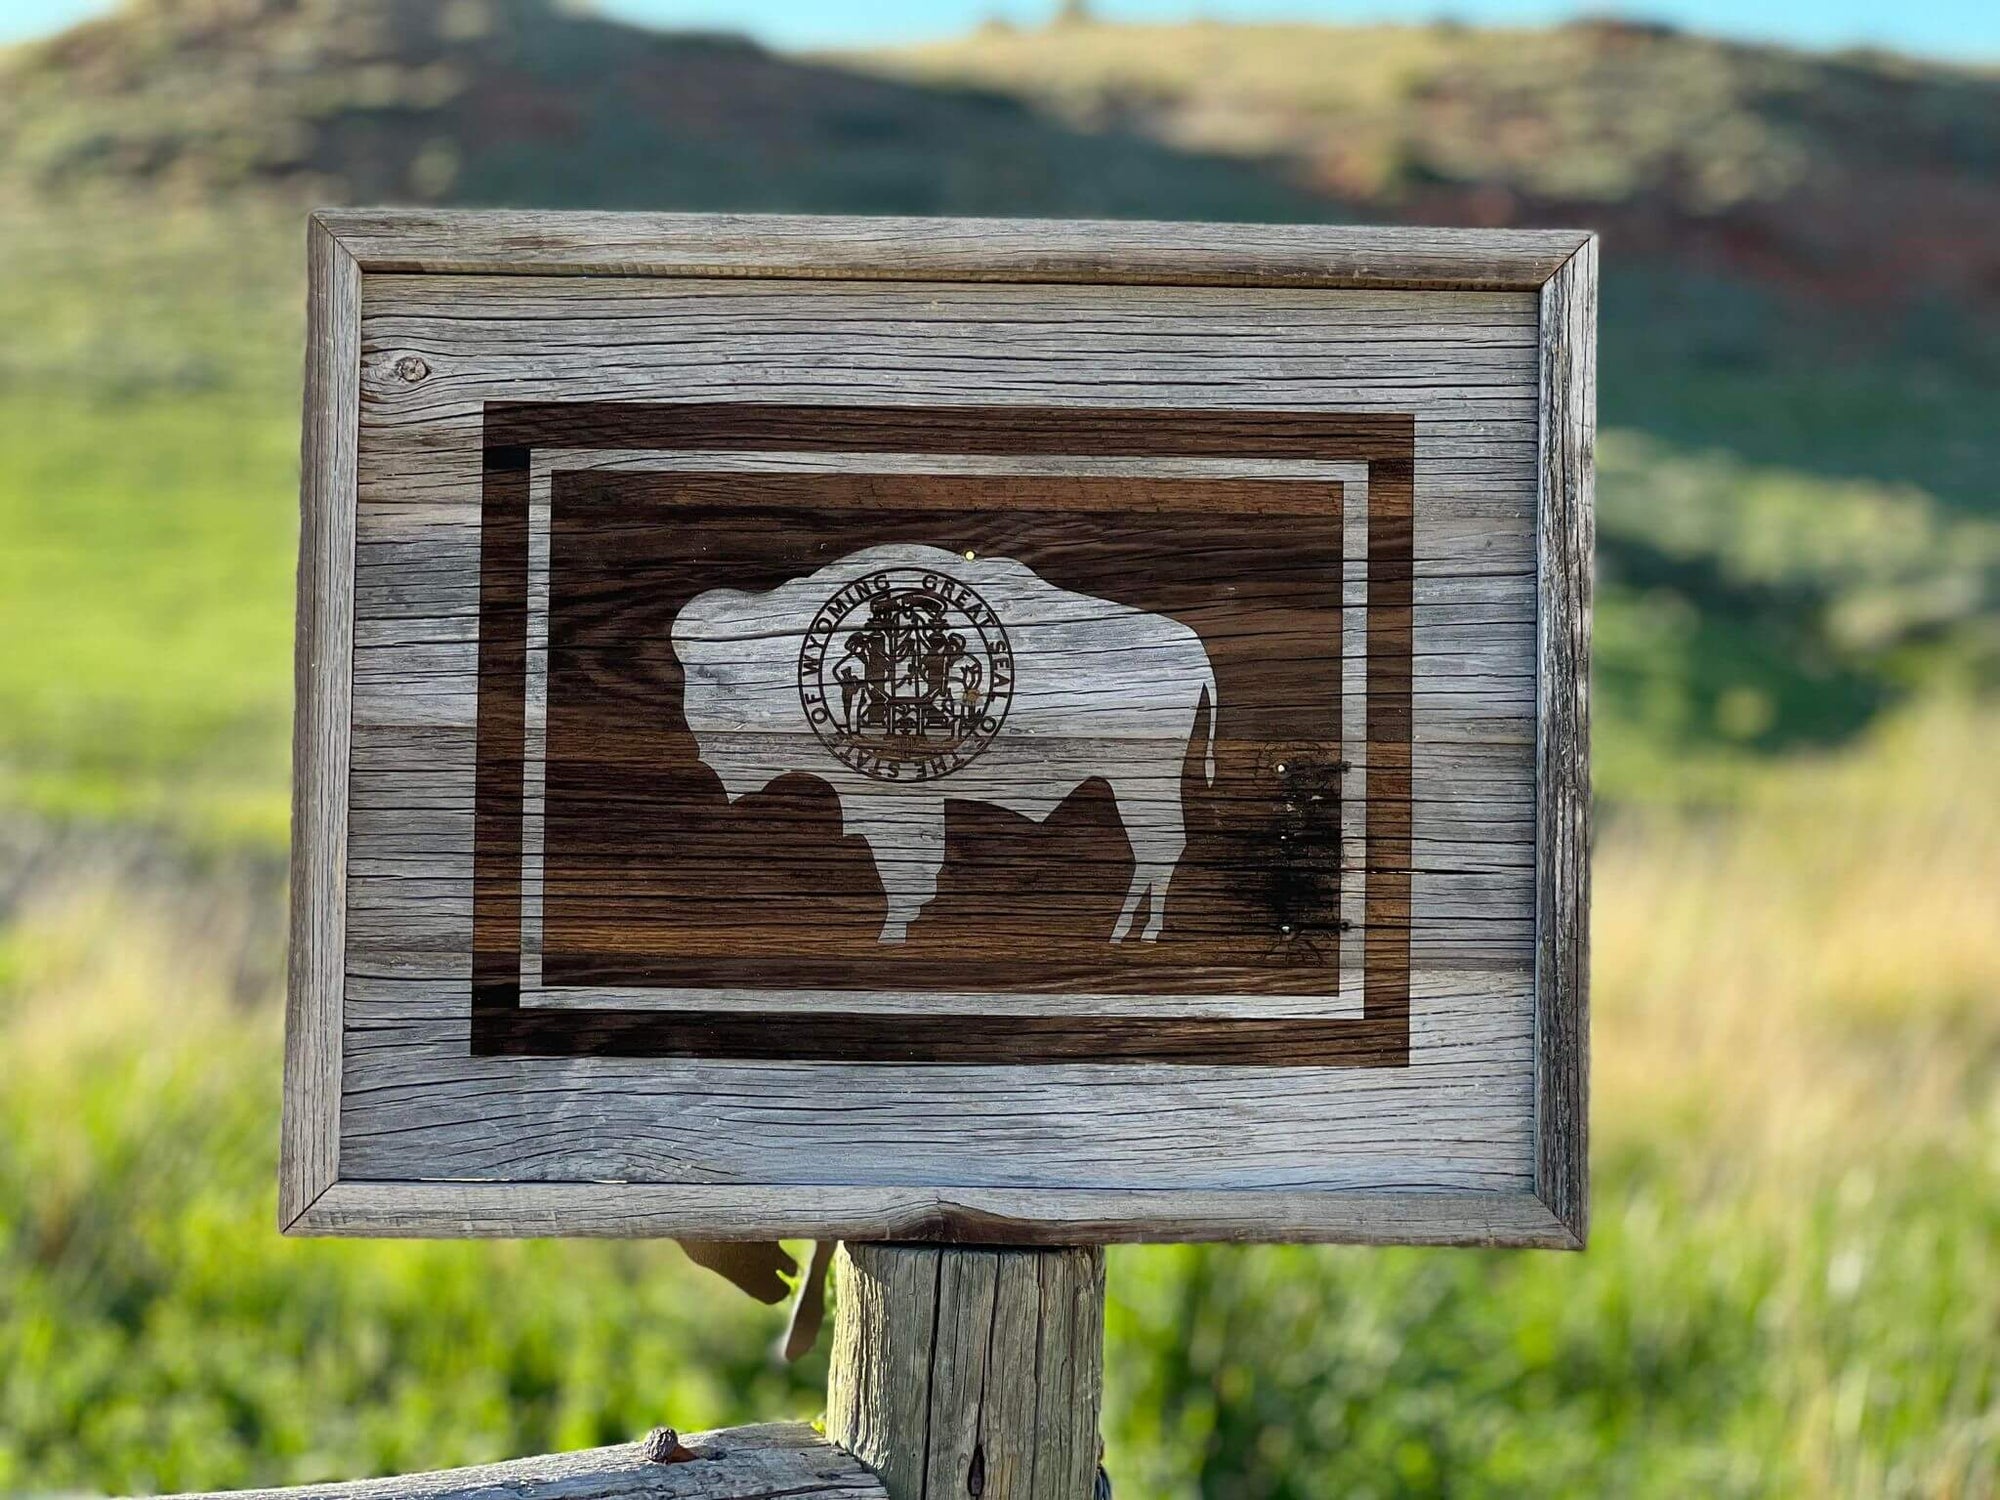 Wyoming Flag wall decor, made of rustic barnwood.  Size is 17" x 21", displayed in photo with Wyoming landscape in background.